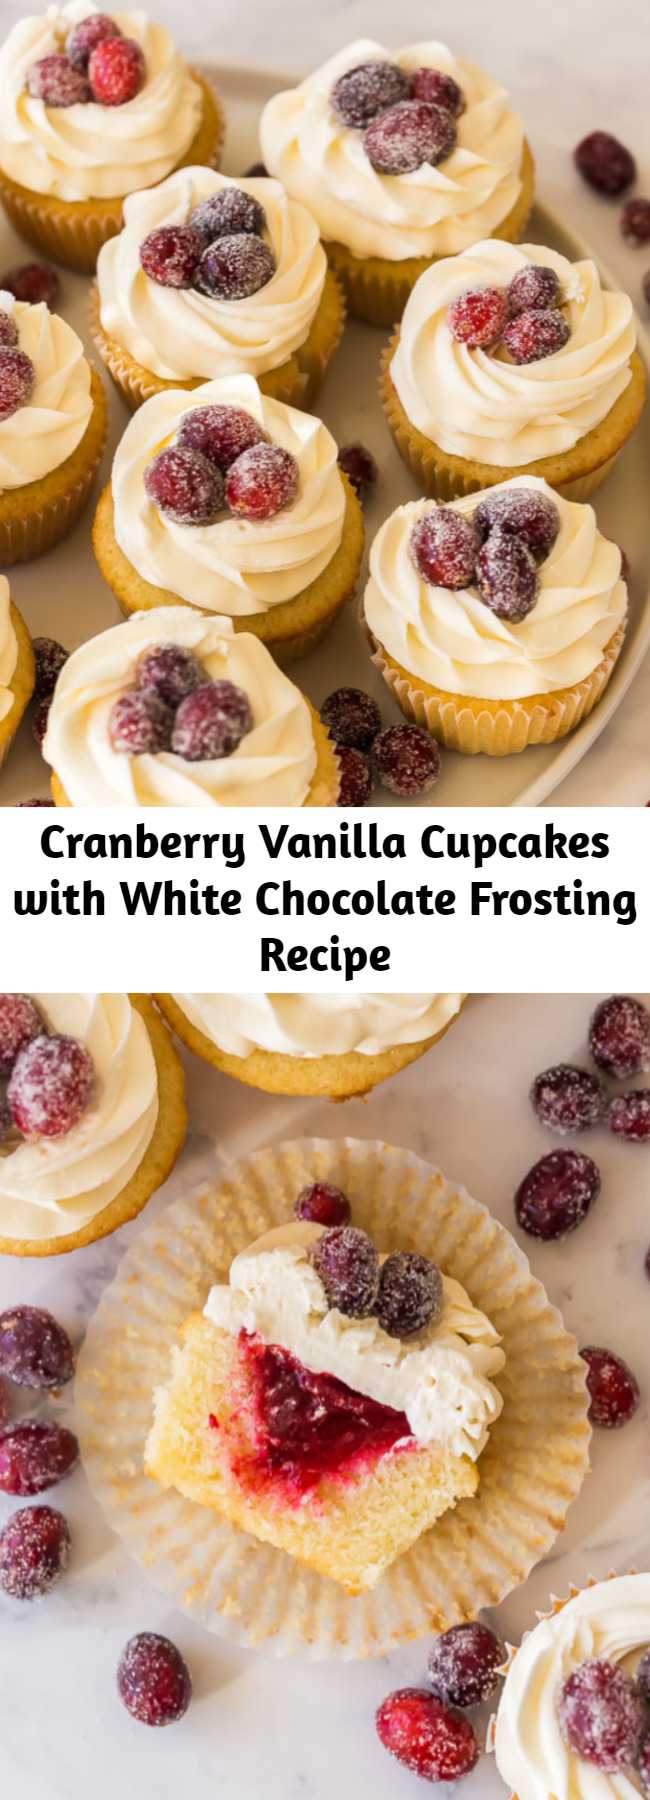 Cranberry Vanilla Cupcakes with White Chocolate Frosting Recipe - Vanilla cupcakes, filled with homemade cranberry filling and topped with a swirl of white chocolate frosting — the perfect festive holiday treat!